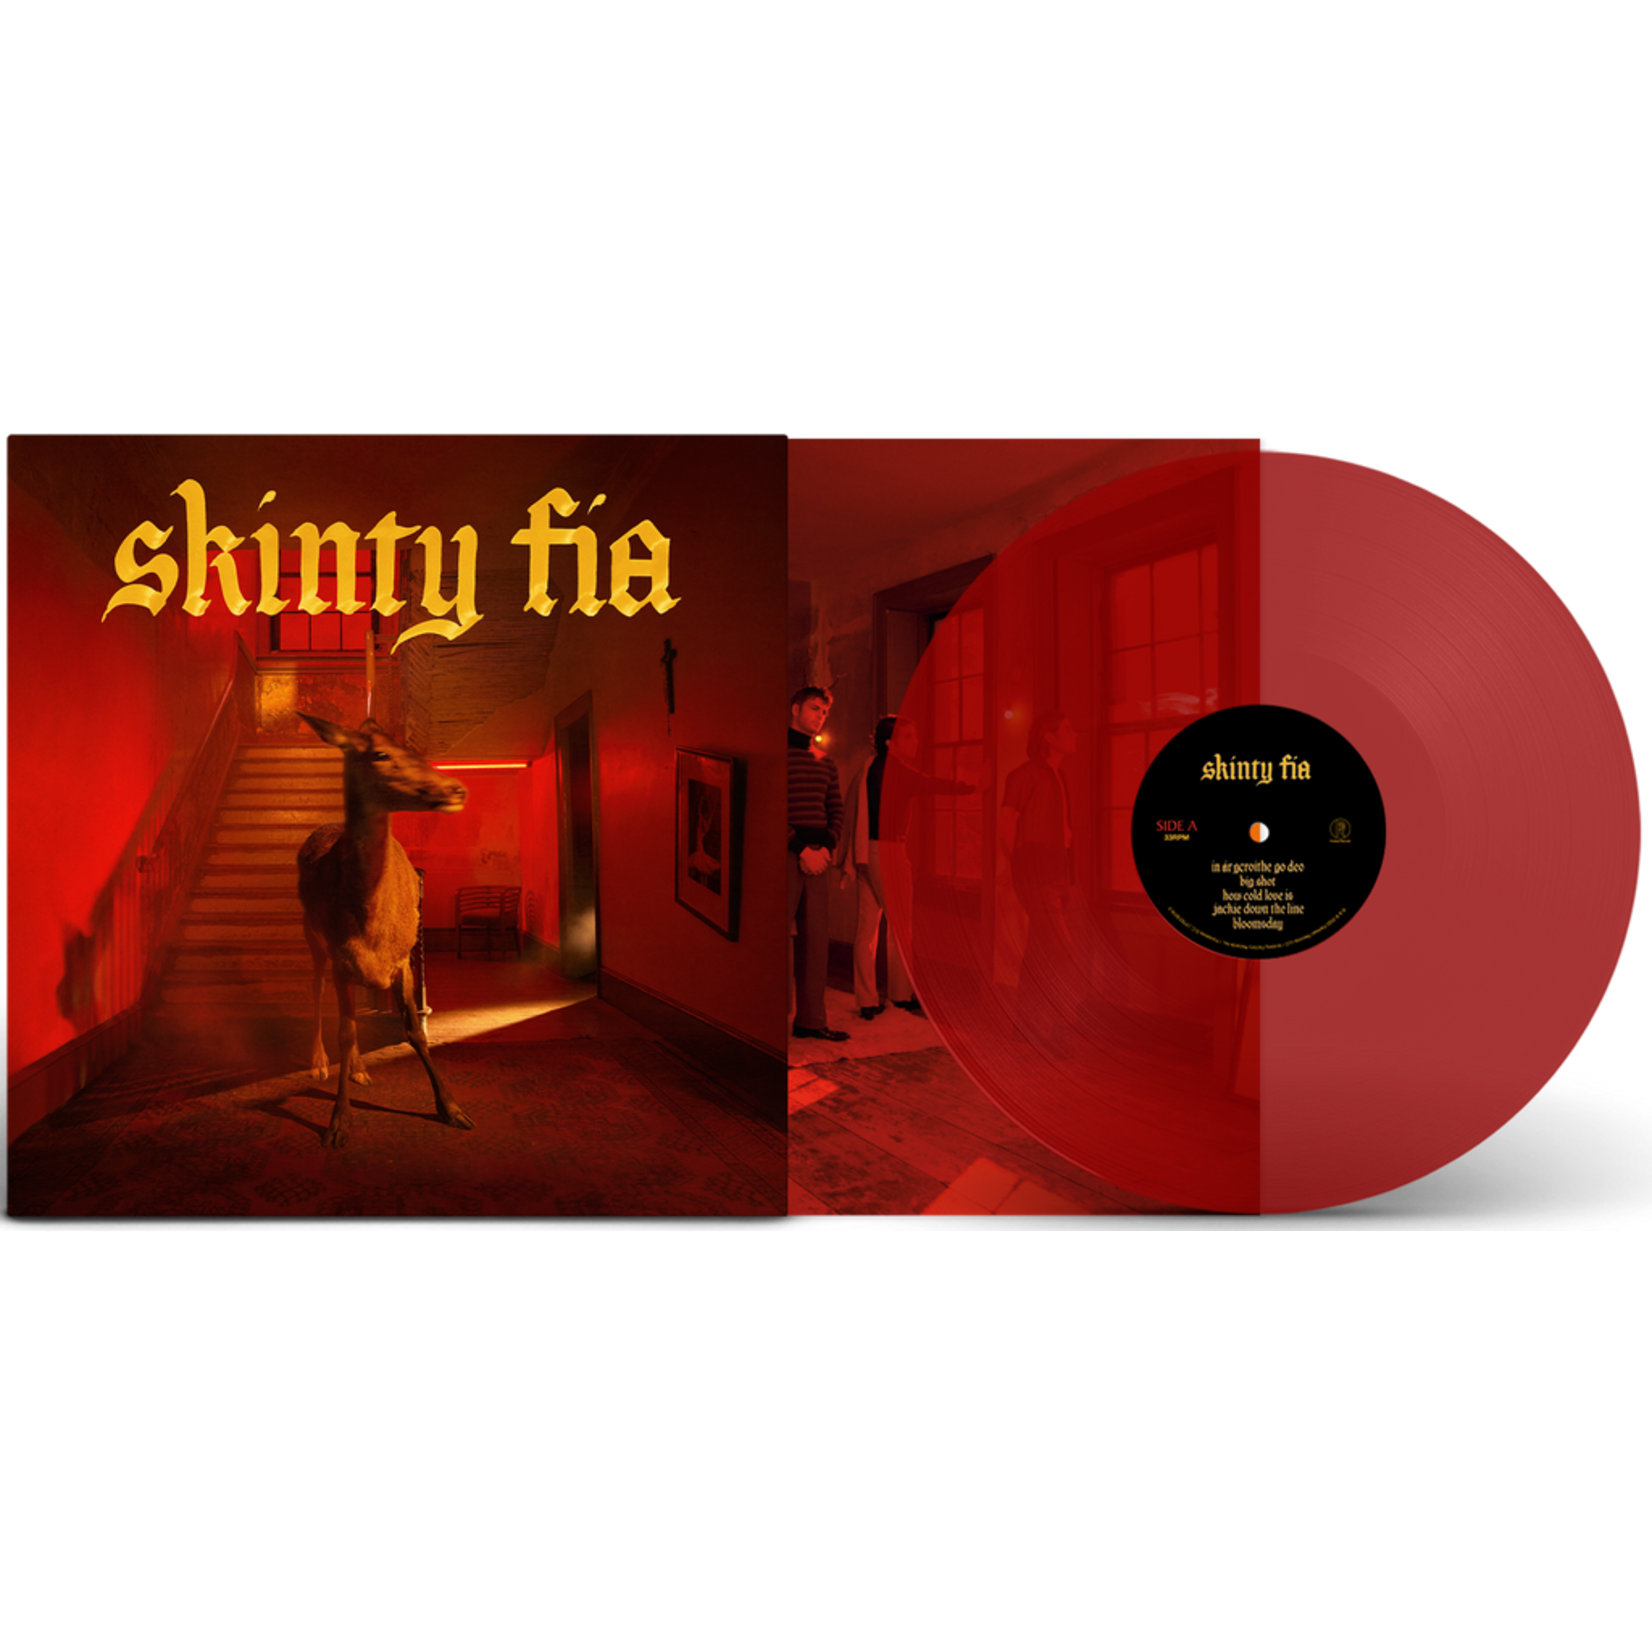 [New] Fontaines D.C. - Skinty Fia (limited edition opaque red vinyl)